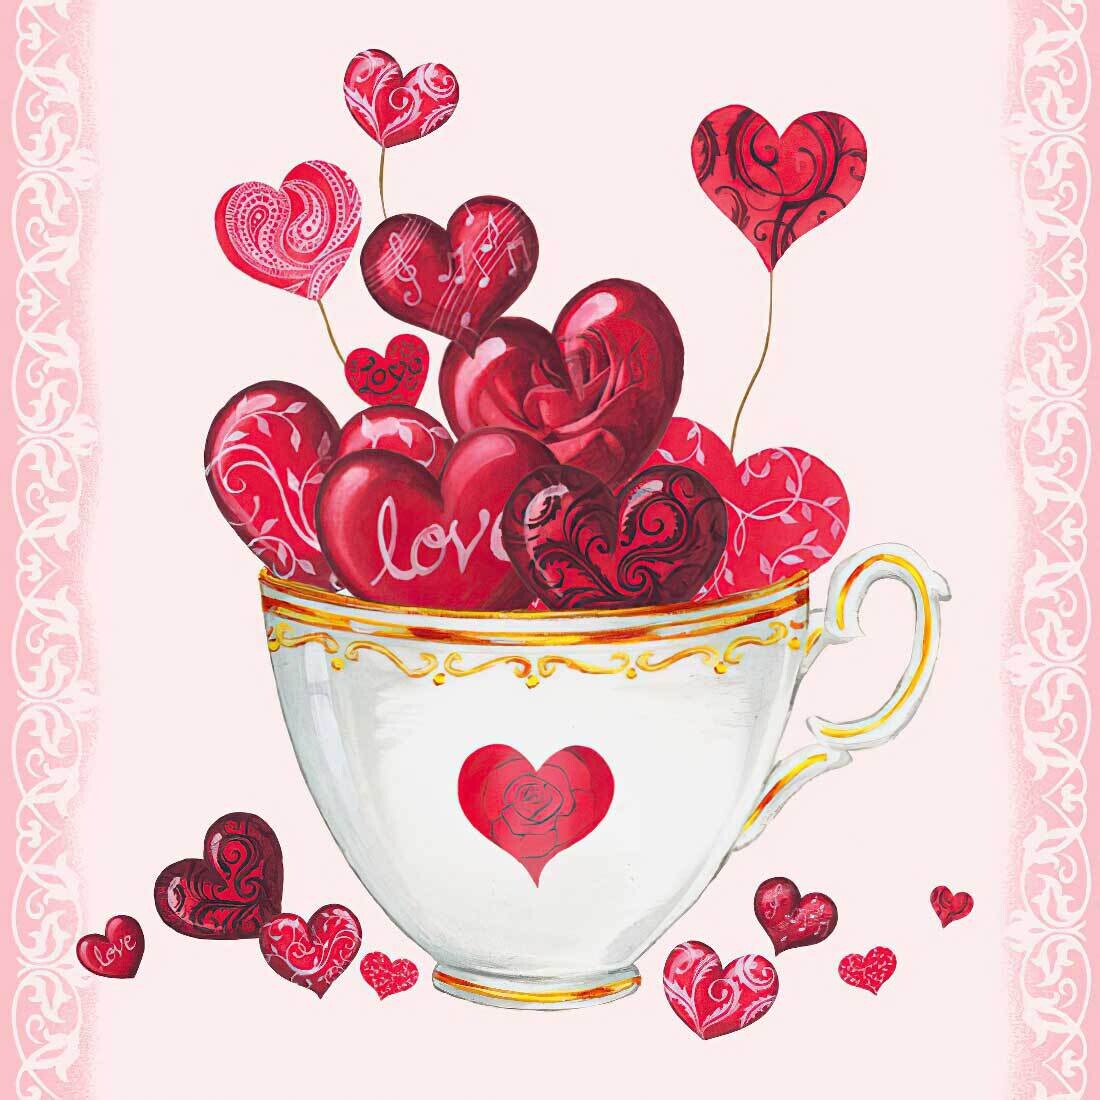 Decoupage Paper Napkins - Heart/Love - Cup of Hearts (1 Sheet)